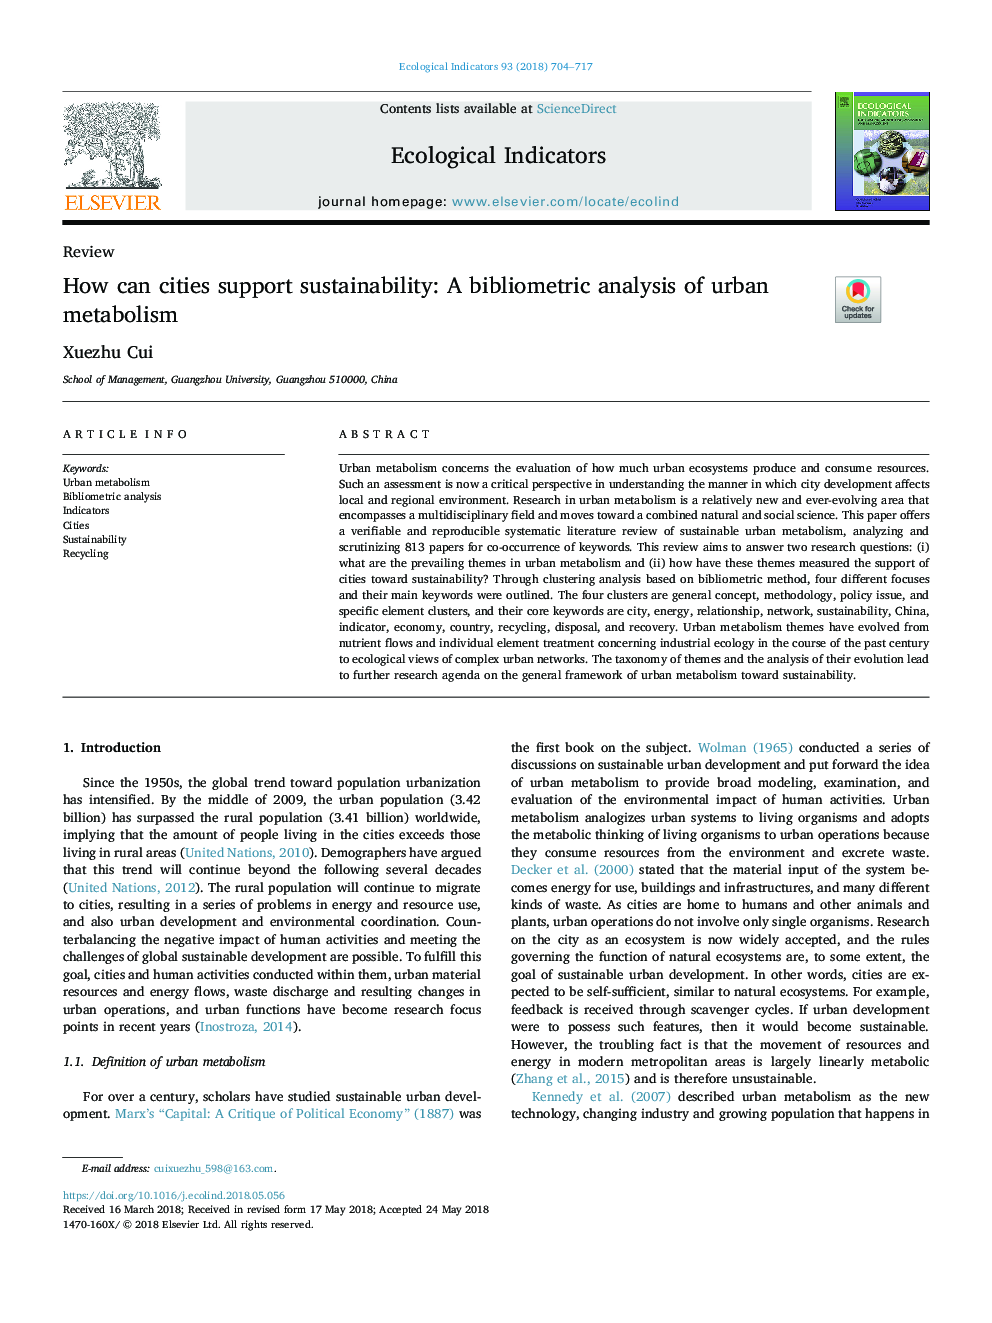 How can cities support sustainability: A bibliometric analysis of urban metabolism